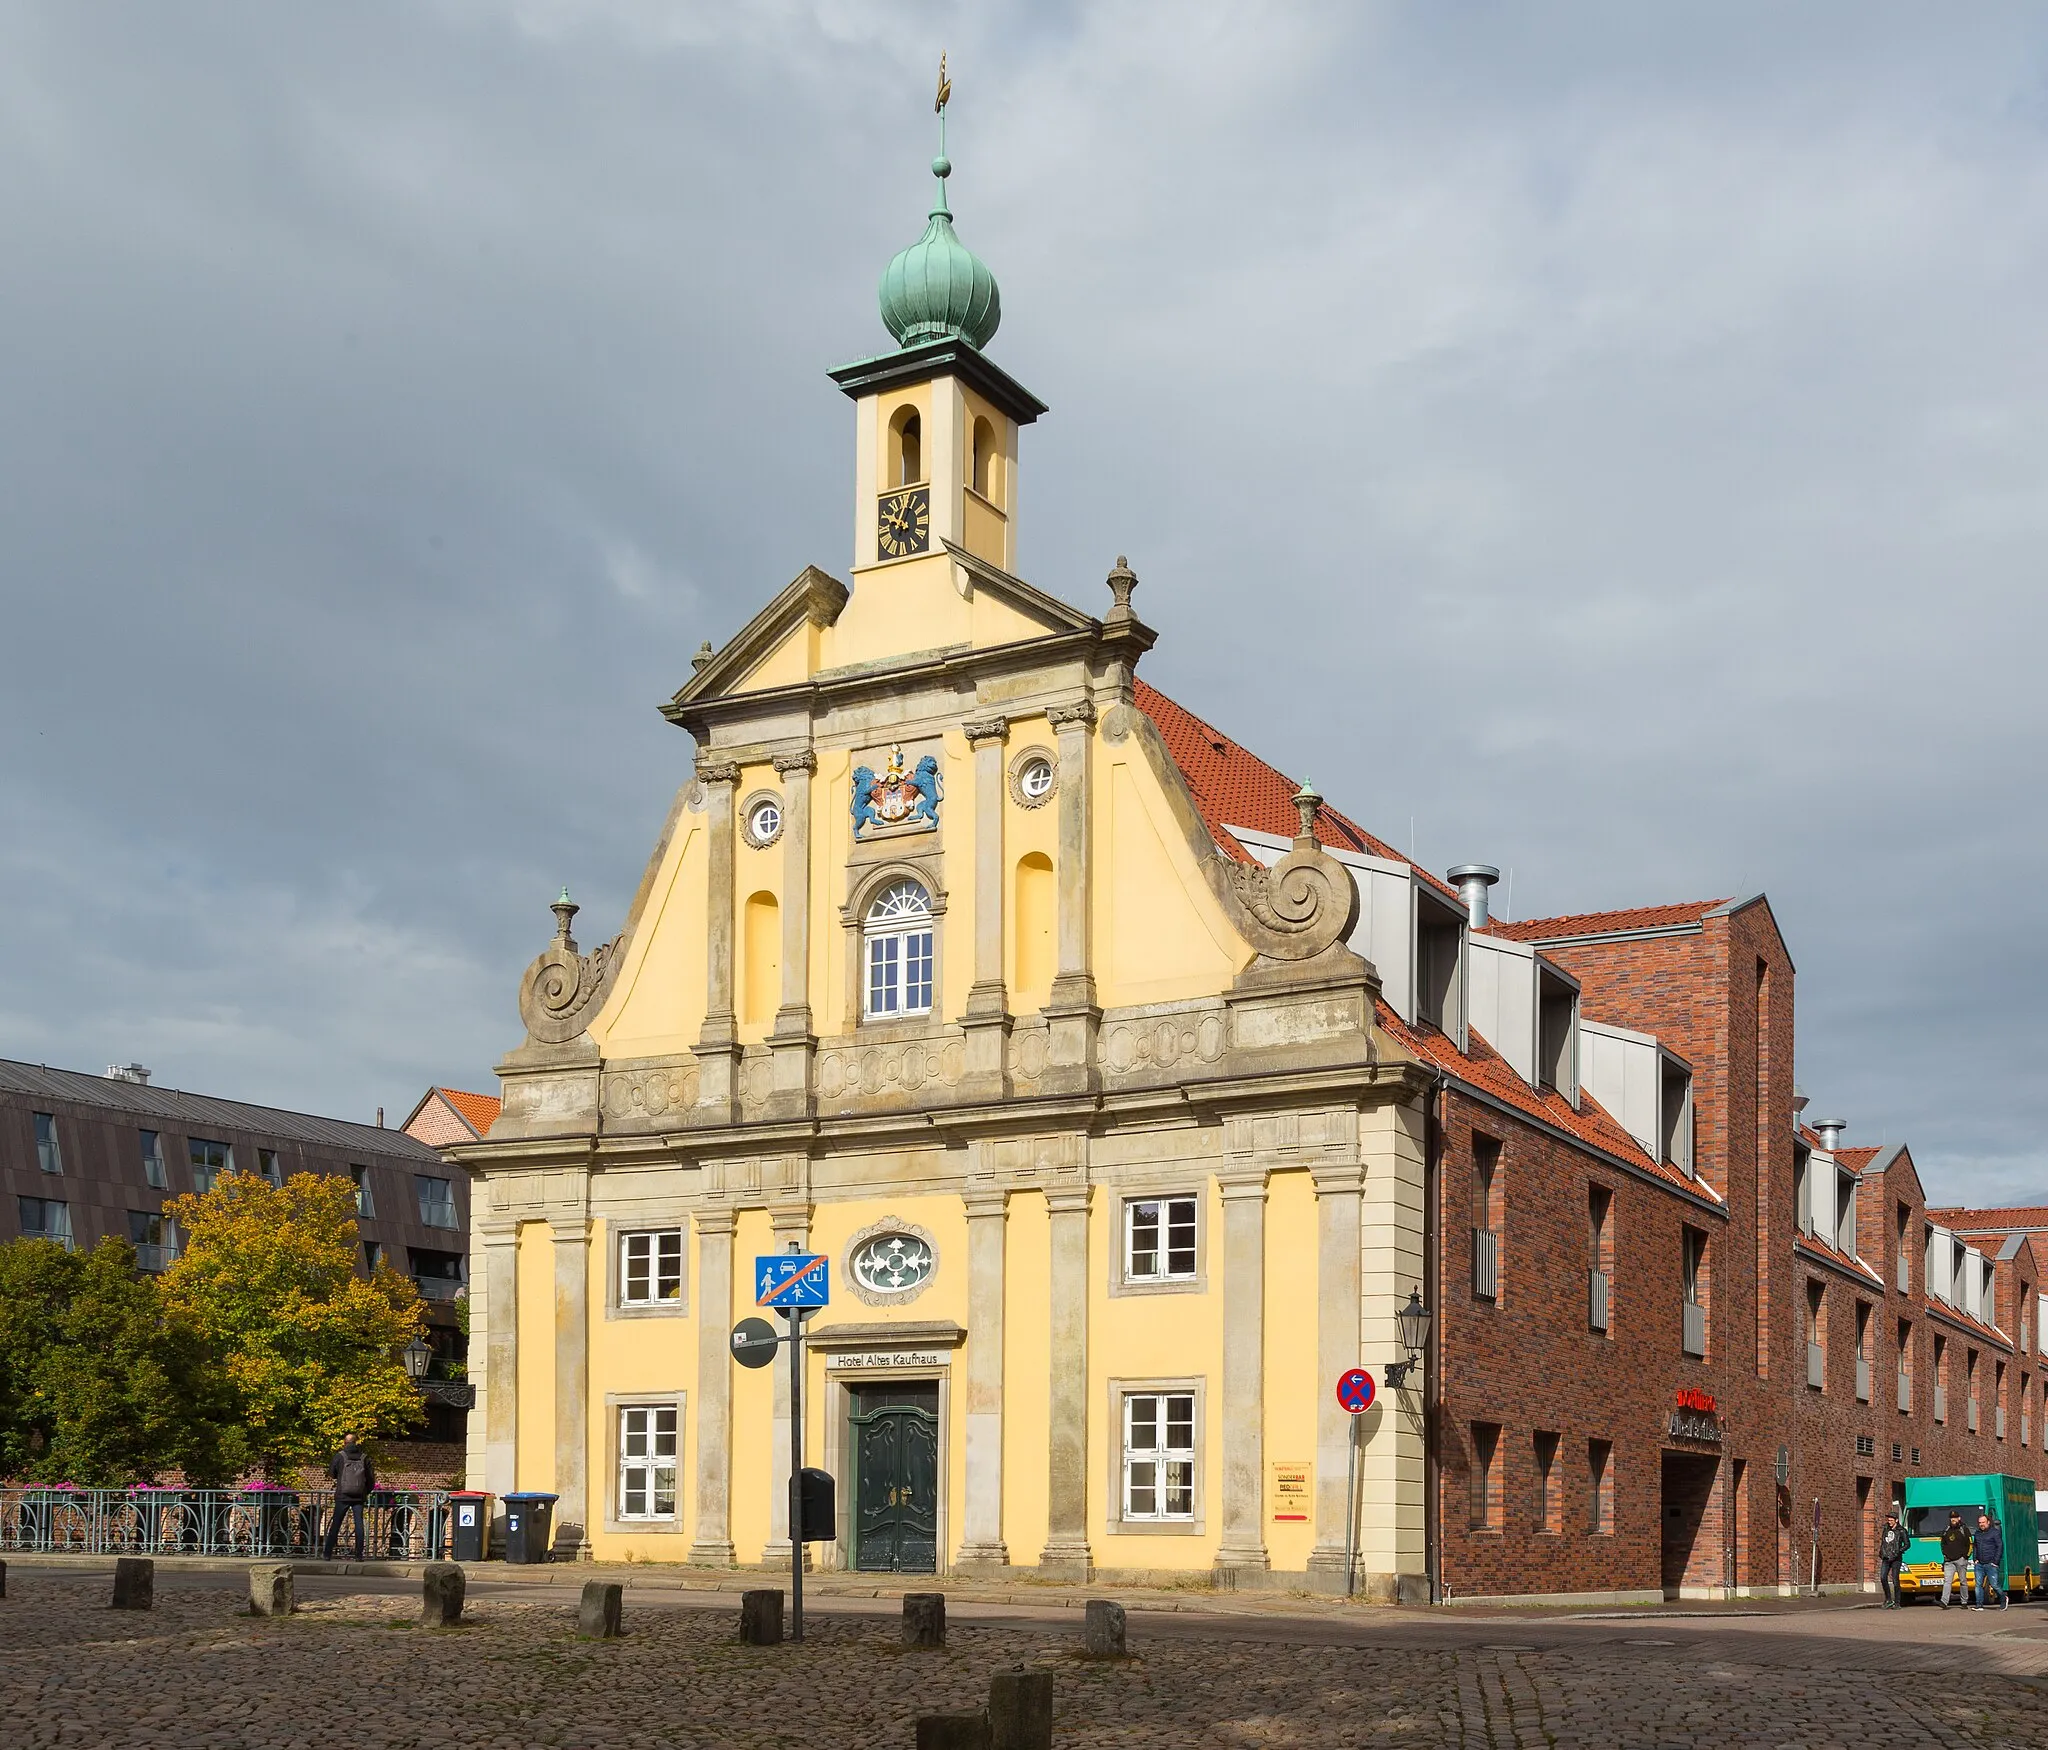 Photo showing: The Hotel Old Store (Hotel Altes Kaufhaus) in Lüneburg, Landkreis Lüneburg, Lower Saxony, Germany. The façade of the Old Store is a listed cultural heritage monument.